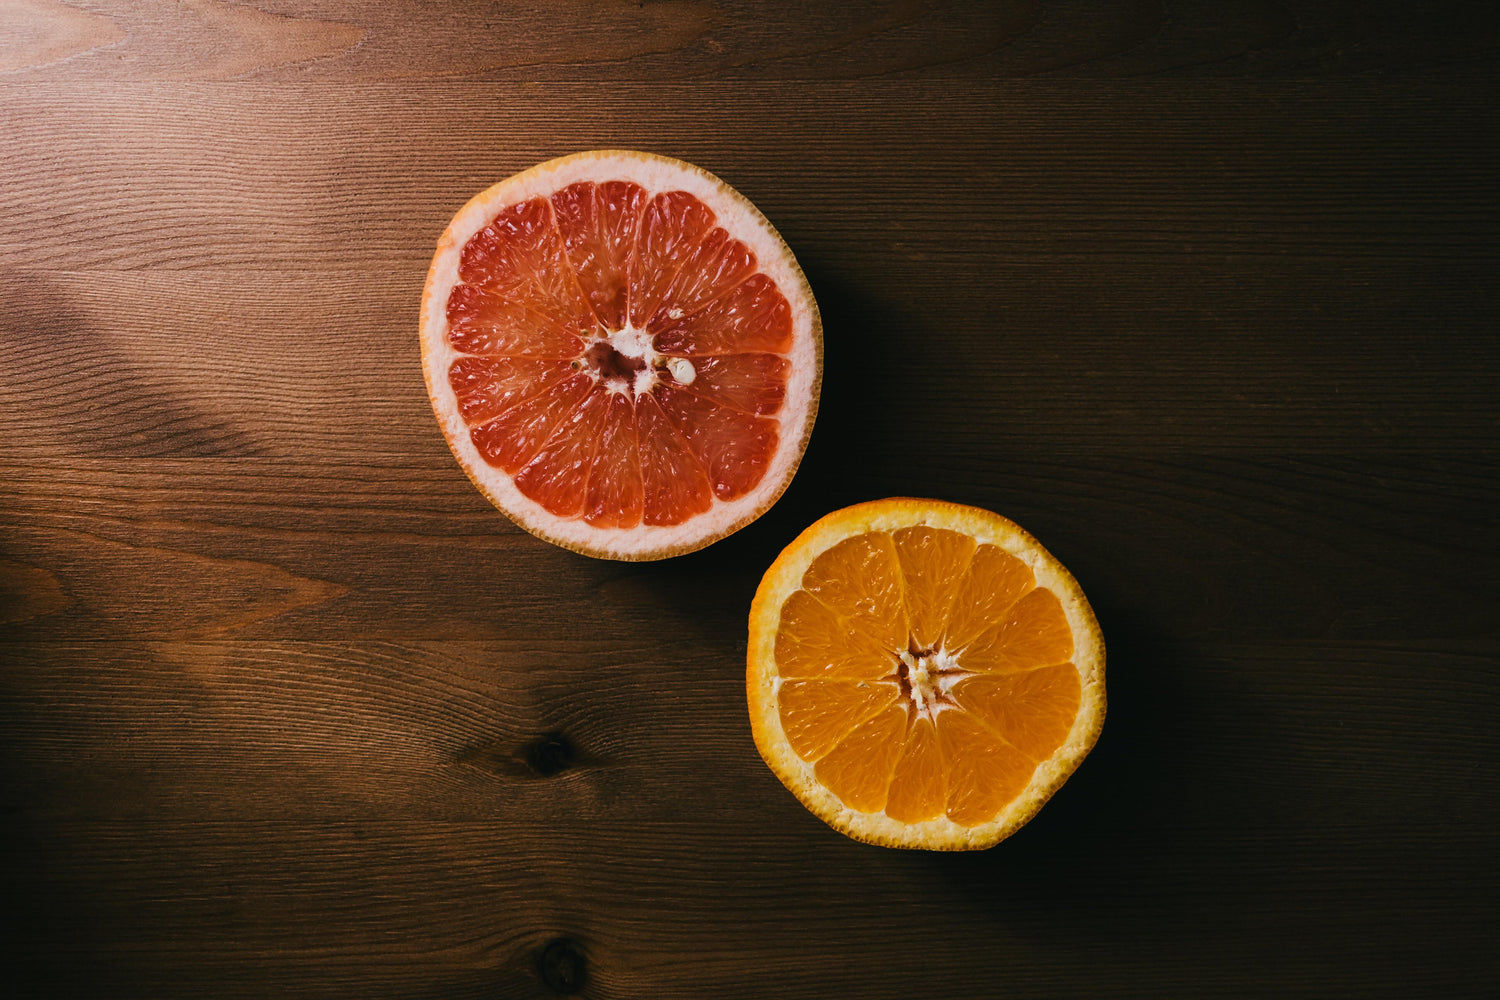 Slice of an orange and grapefruit on wood board